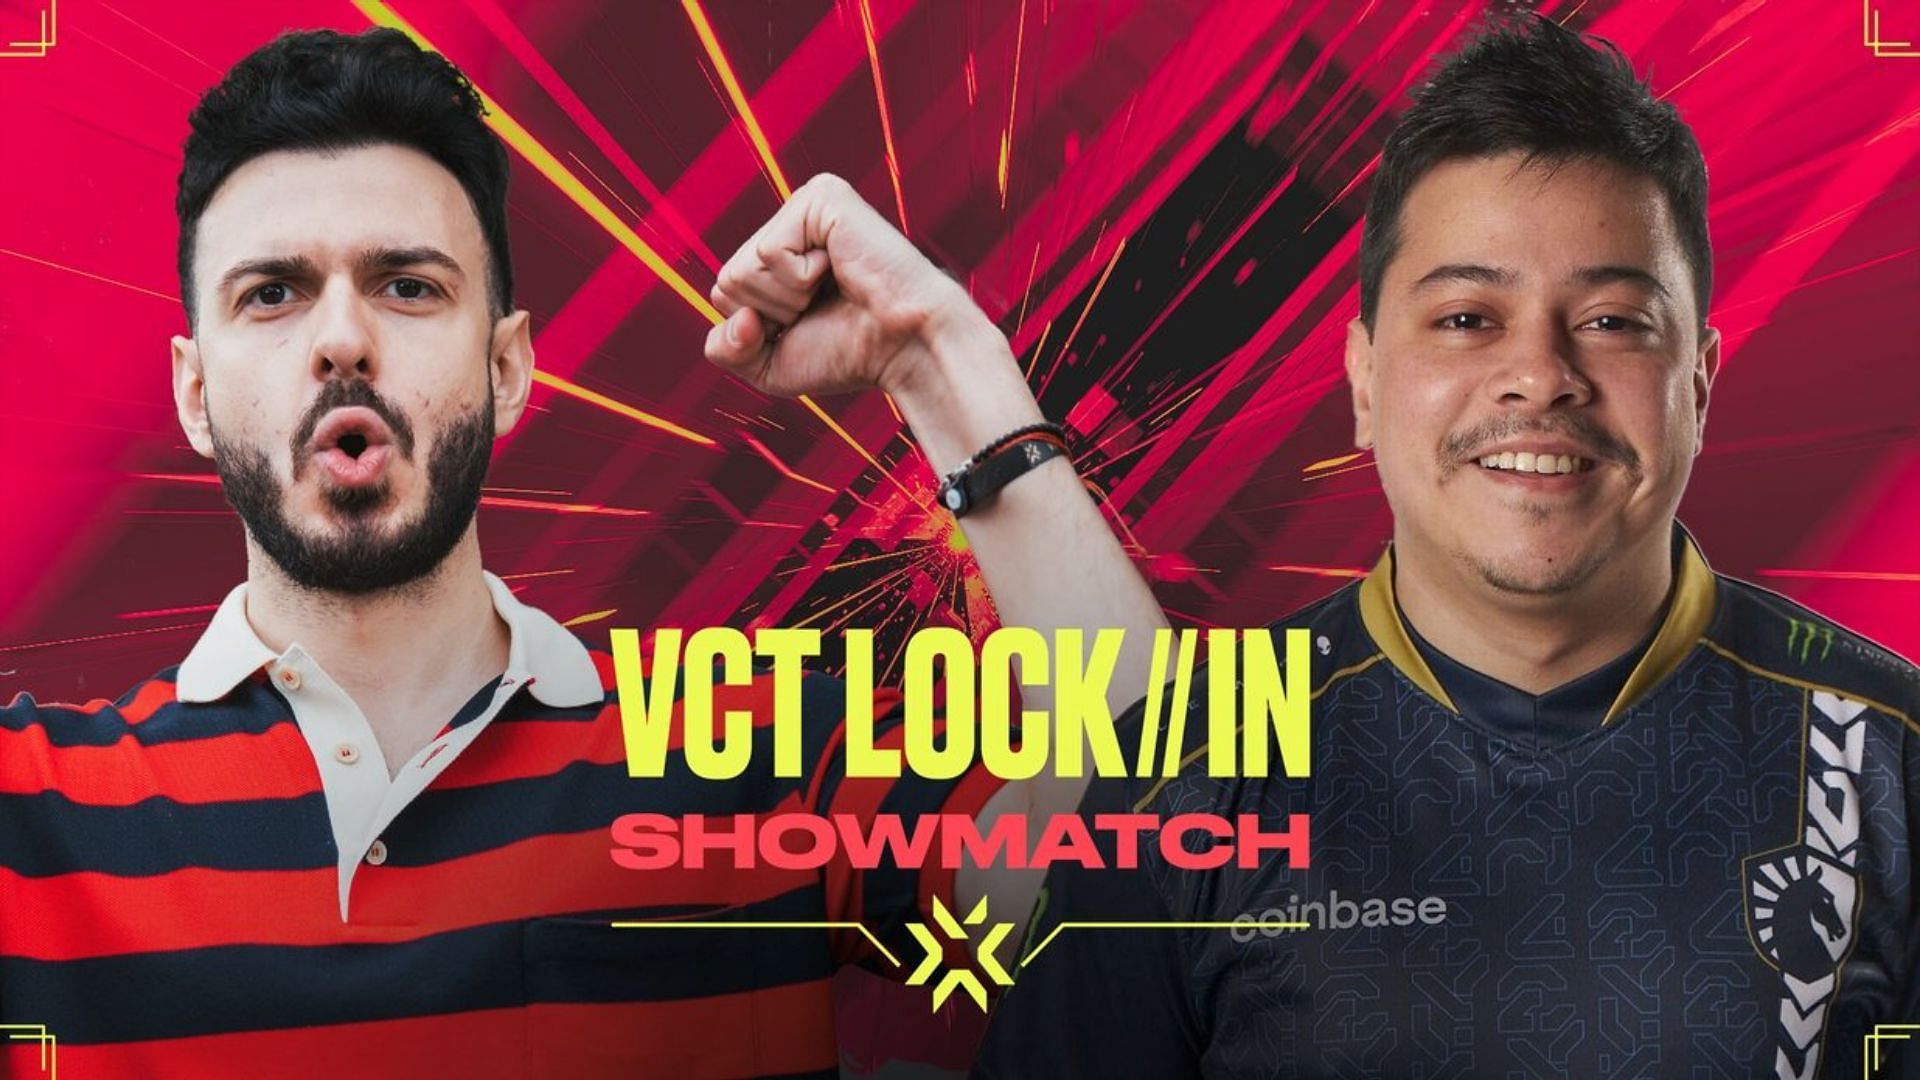 Tarik and frttt will lead two teams in a showmatch in VCT LOCK//IN (Image via Twitter/@GeorgeCGed)